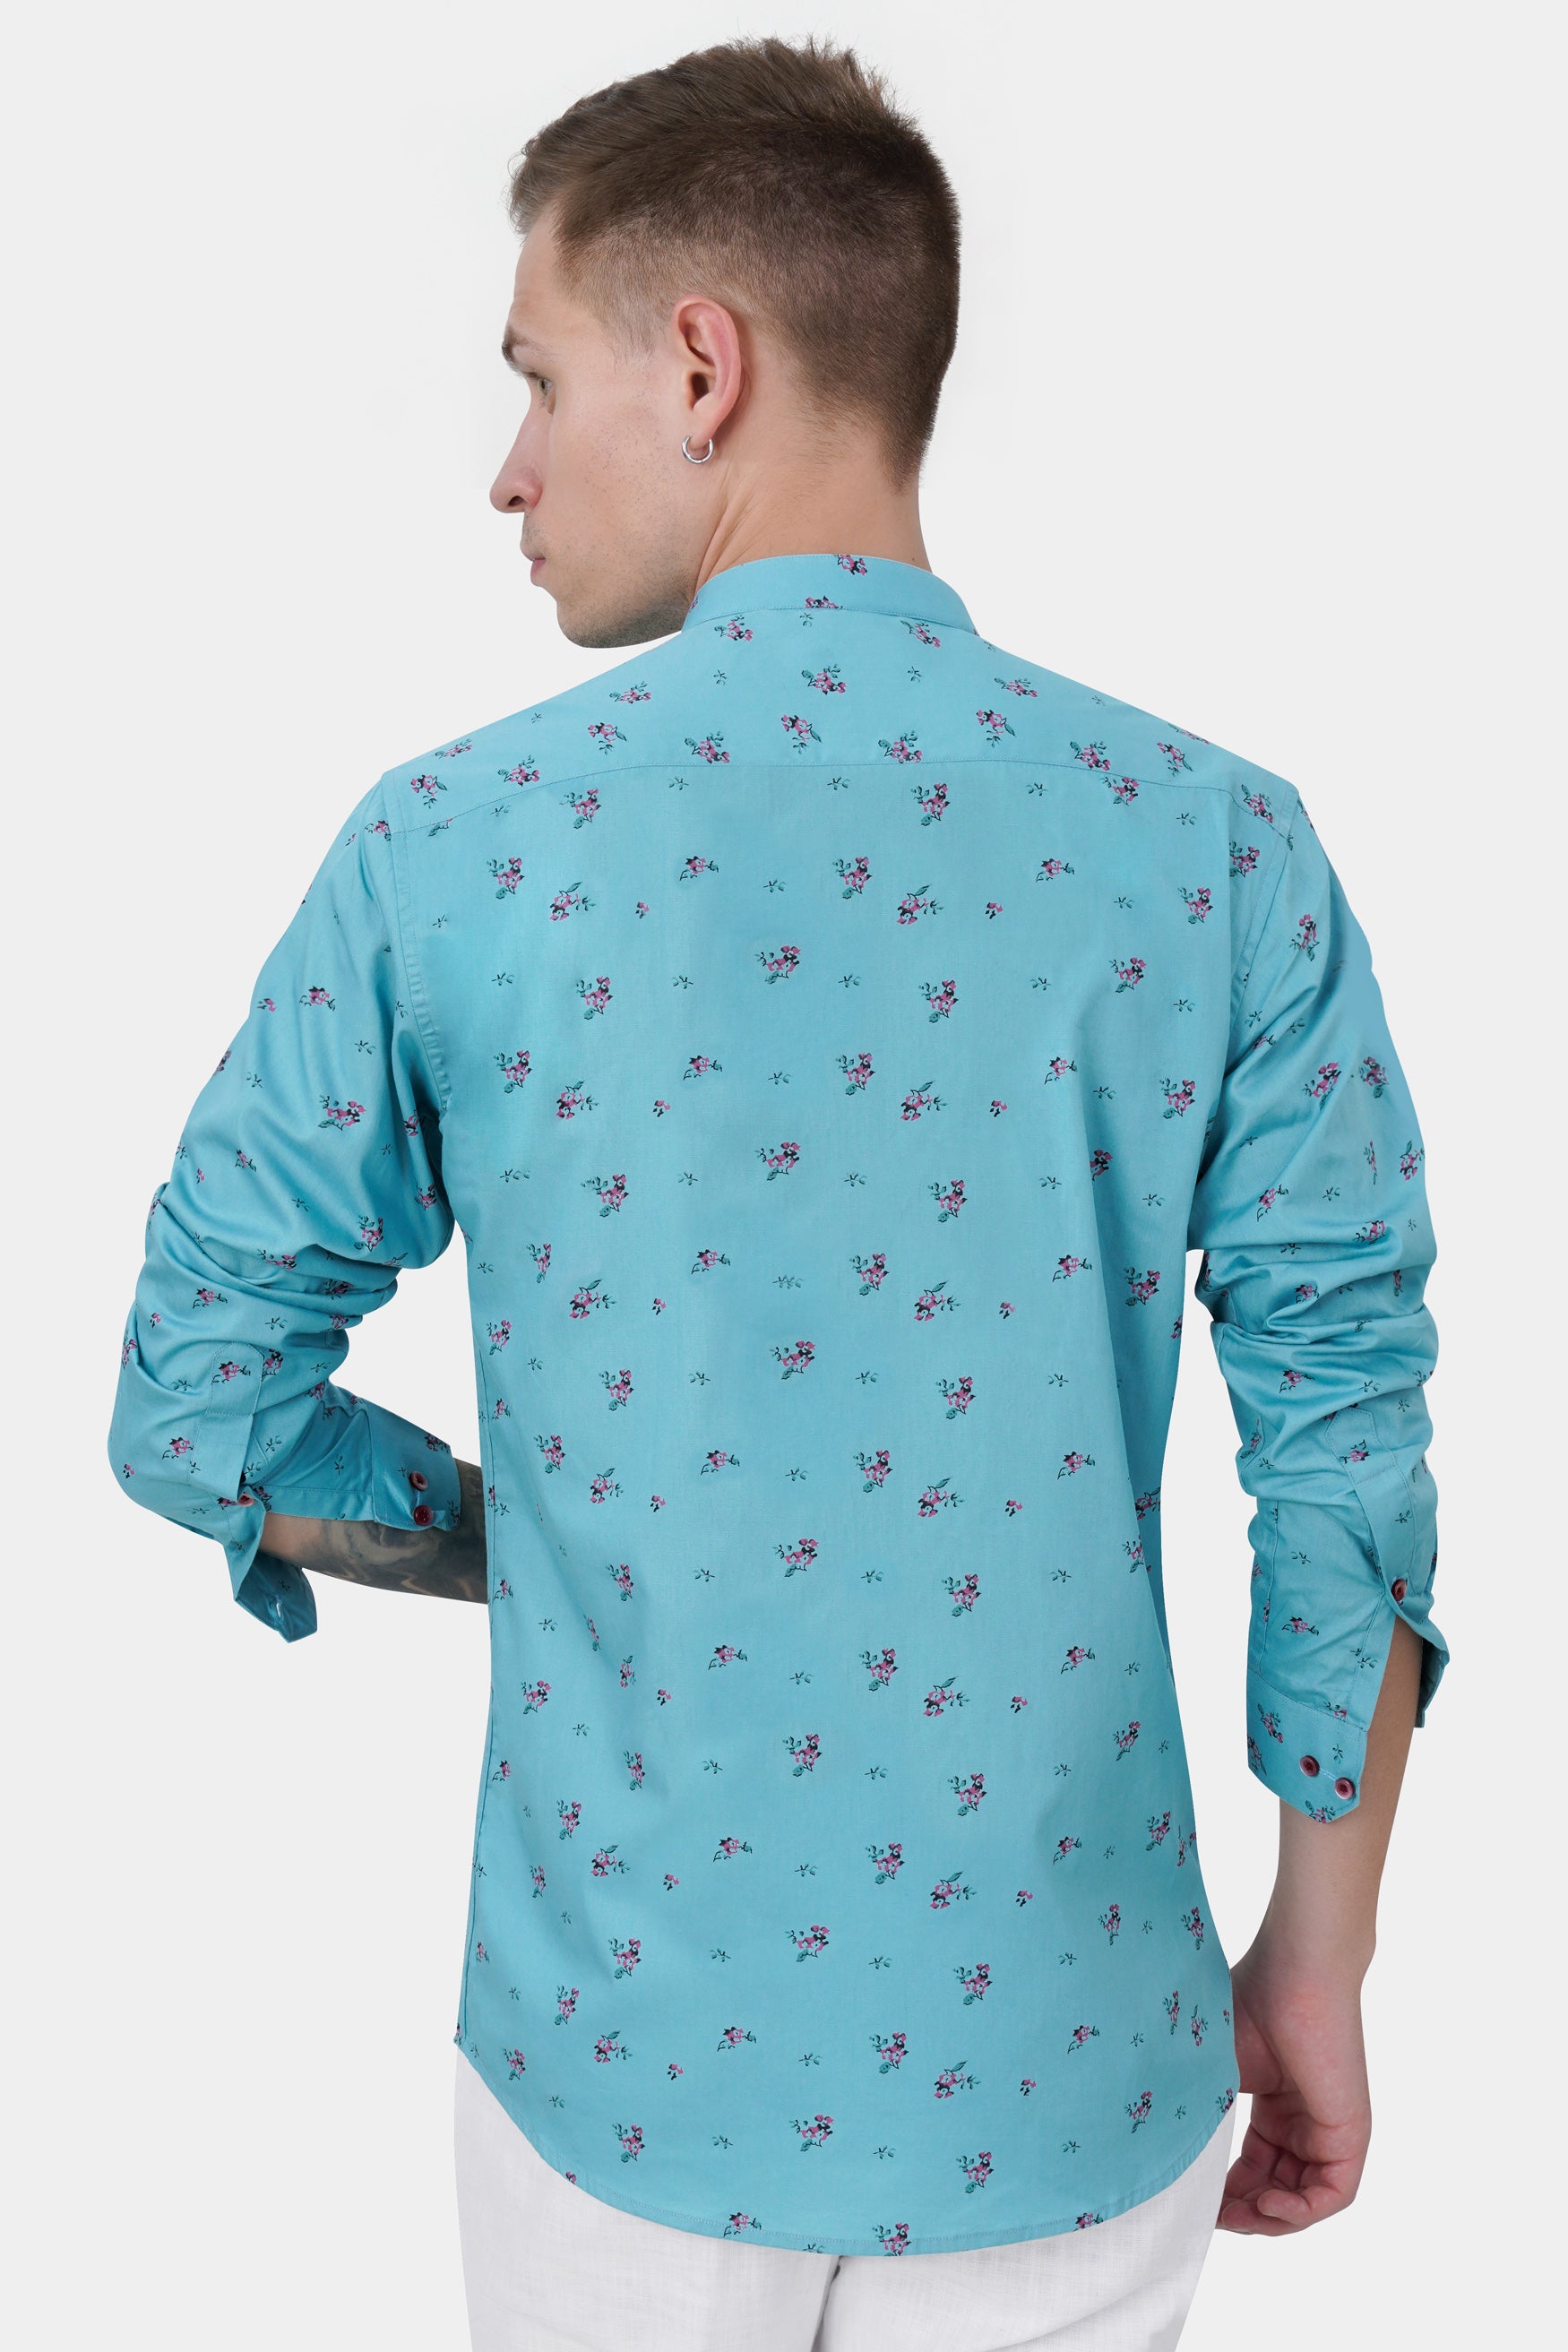 Glacier Blue and Fuchsia Pink Ditsy Printed Premium Cotton Shirt 11713-M-MN-38, 11713-M-MN-H-38, 11713-M-MN-39, 11713-M-MN-H-39, 11713-M-MN-40, 11713-M-MN-H-40, 11713-M-MN-42, 11713-M-MN-H-42, 11713-M-MN-44, 11713-M-MN-H-44, 11713-M-MN-46, 11713-M-MN-H-46, 11713-M-MN-48, 11713-M-MN-H-48, 11713-M-MN-50, 11713-M-MN-H-50, 11713-M-MN-52, 11713-M-MN-H-52